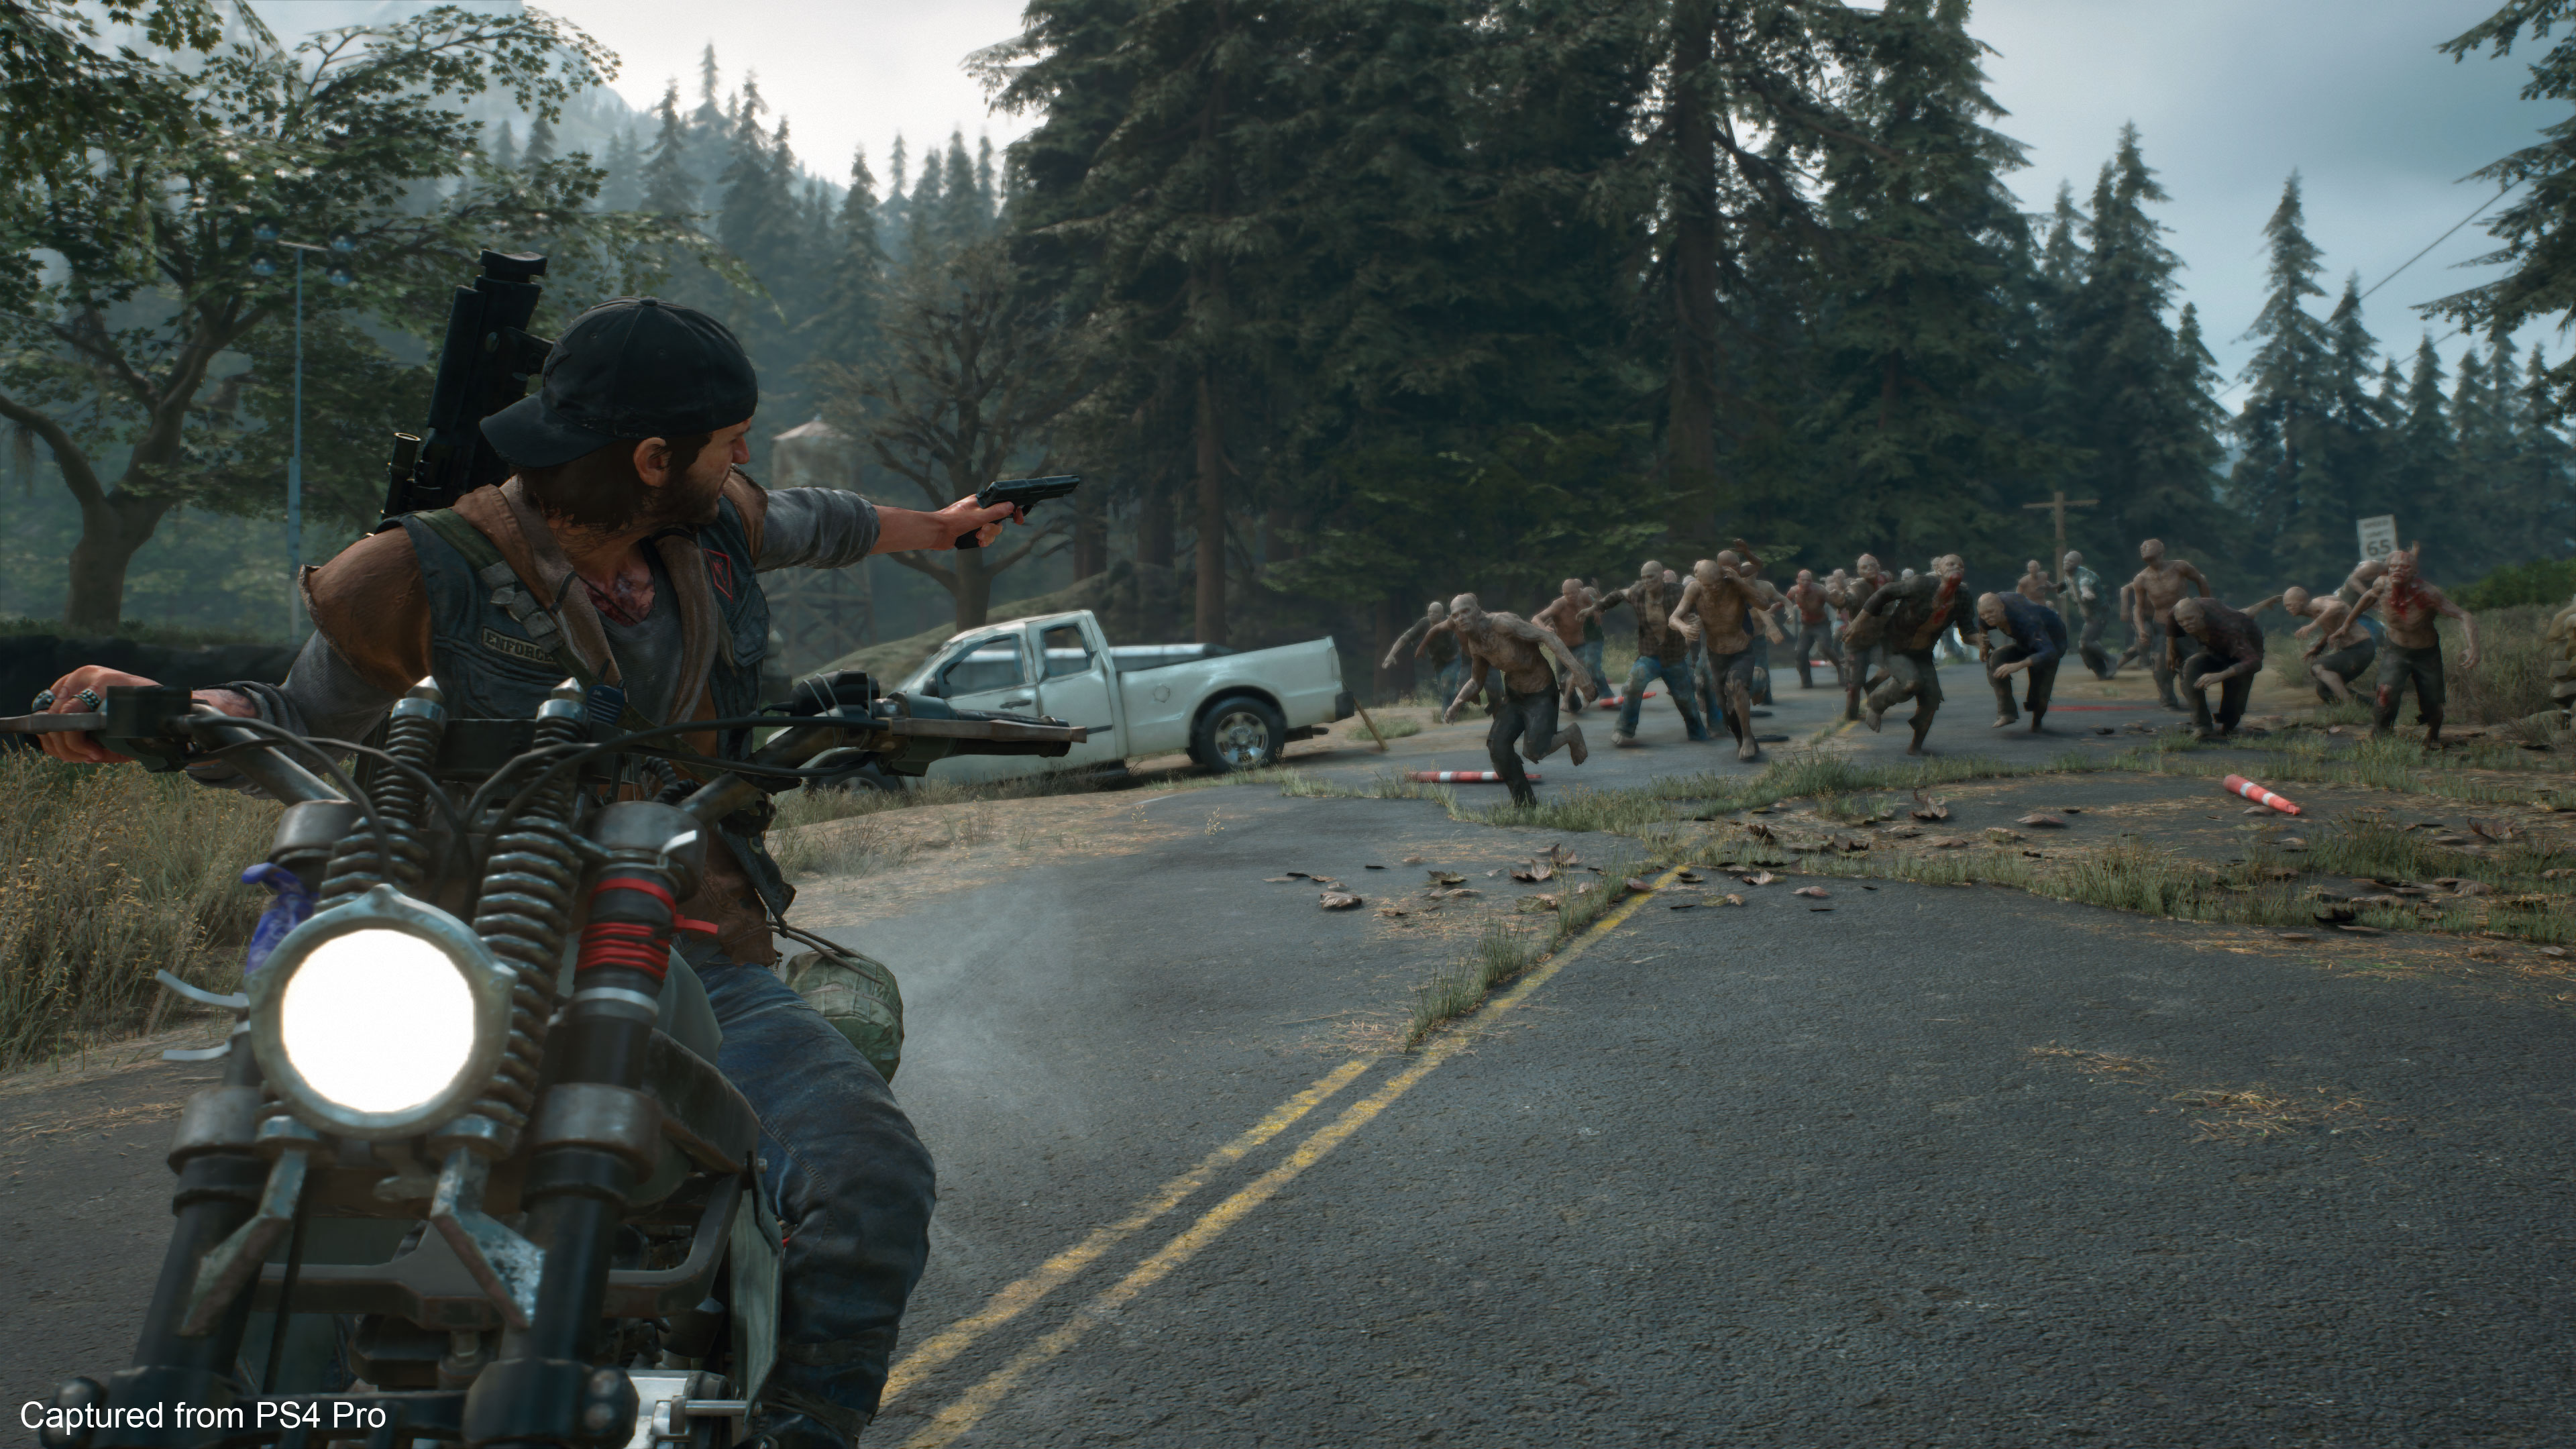 Will your PC be able to handle Days Gone?